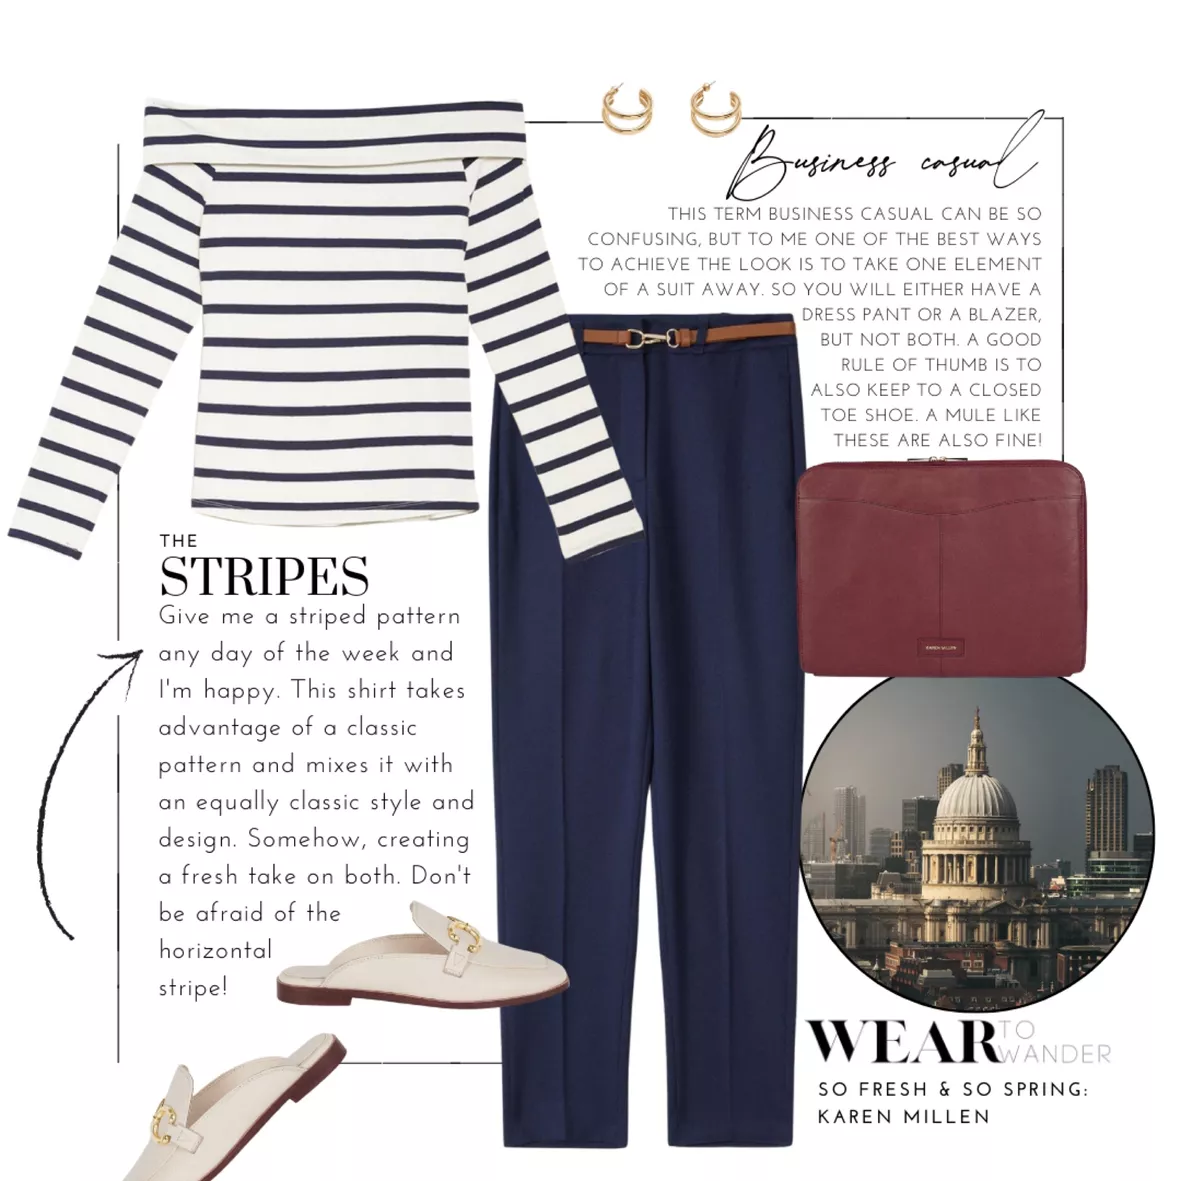 Keeping it Casual - The Stripe